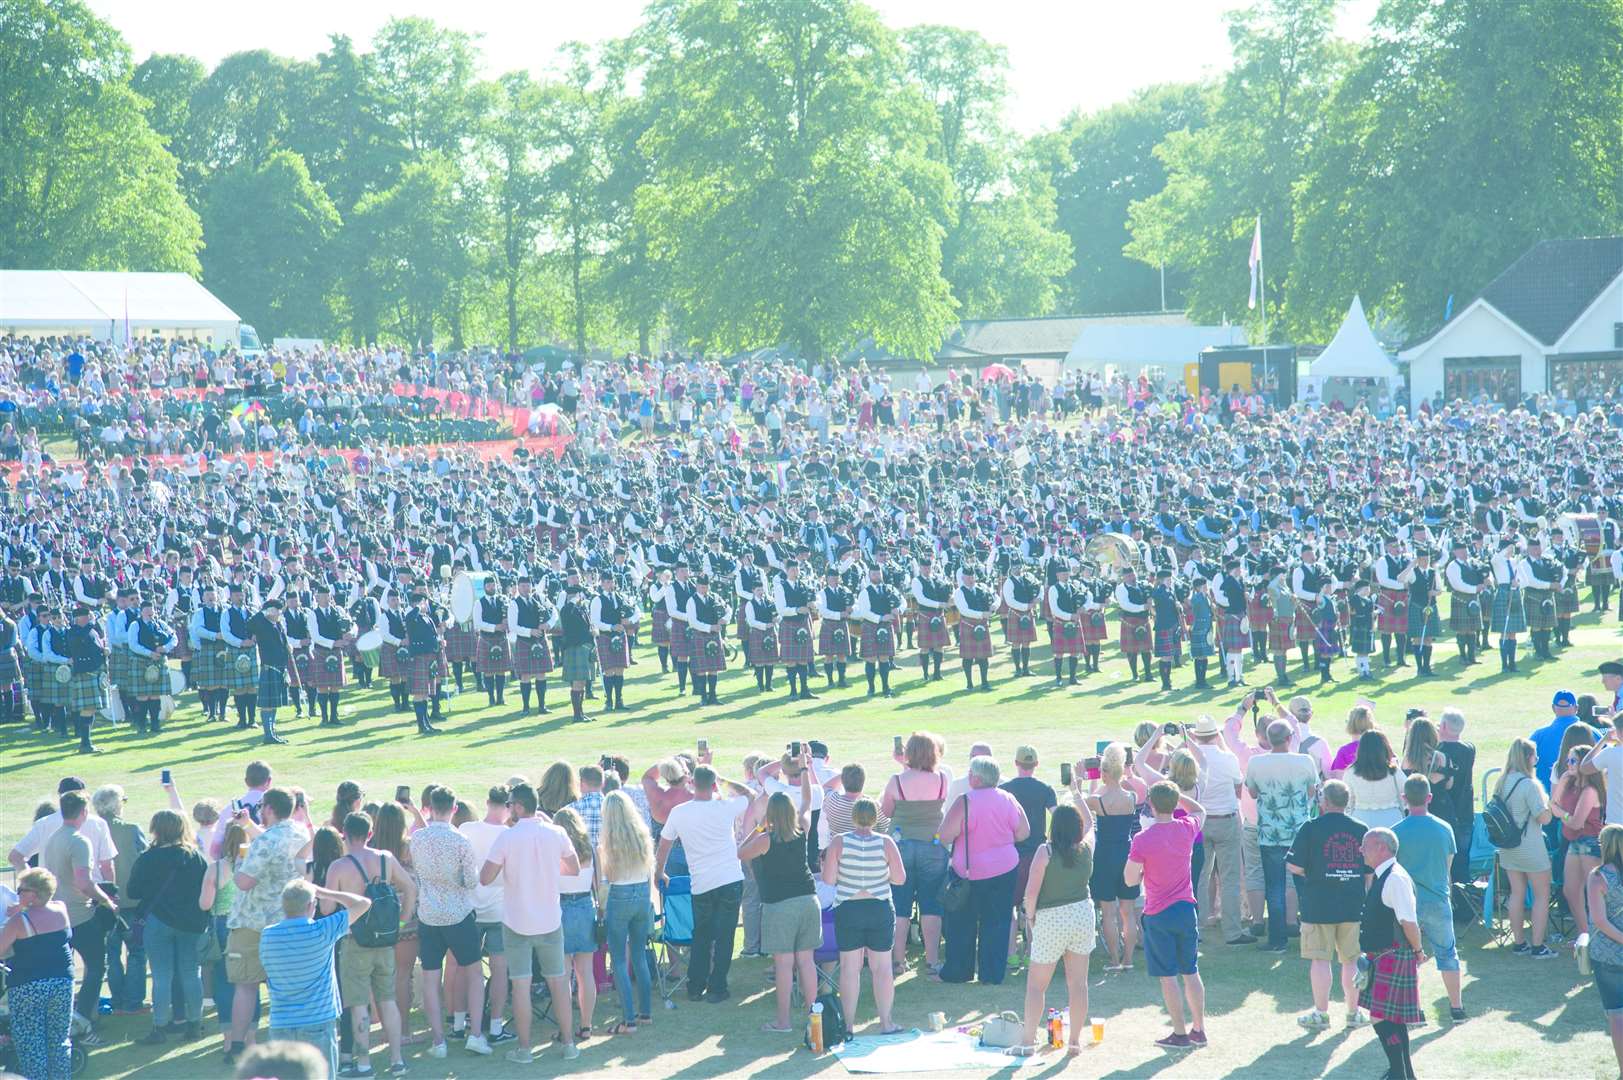 The sixth and final visit of the European Pipe Band Championships to Grant Park.